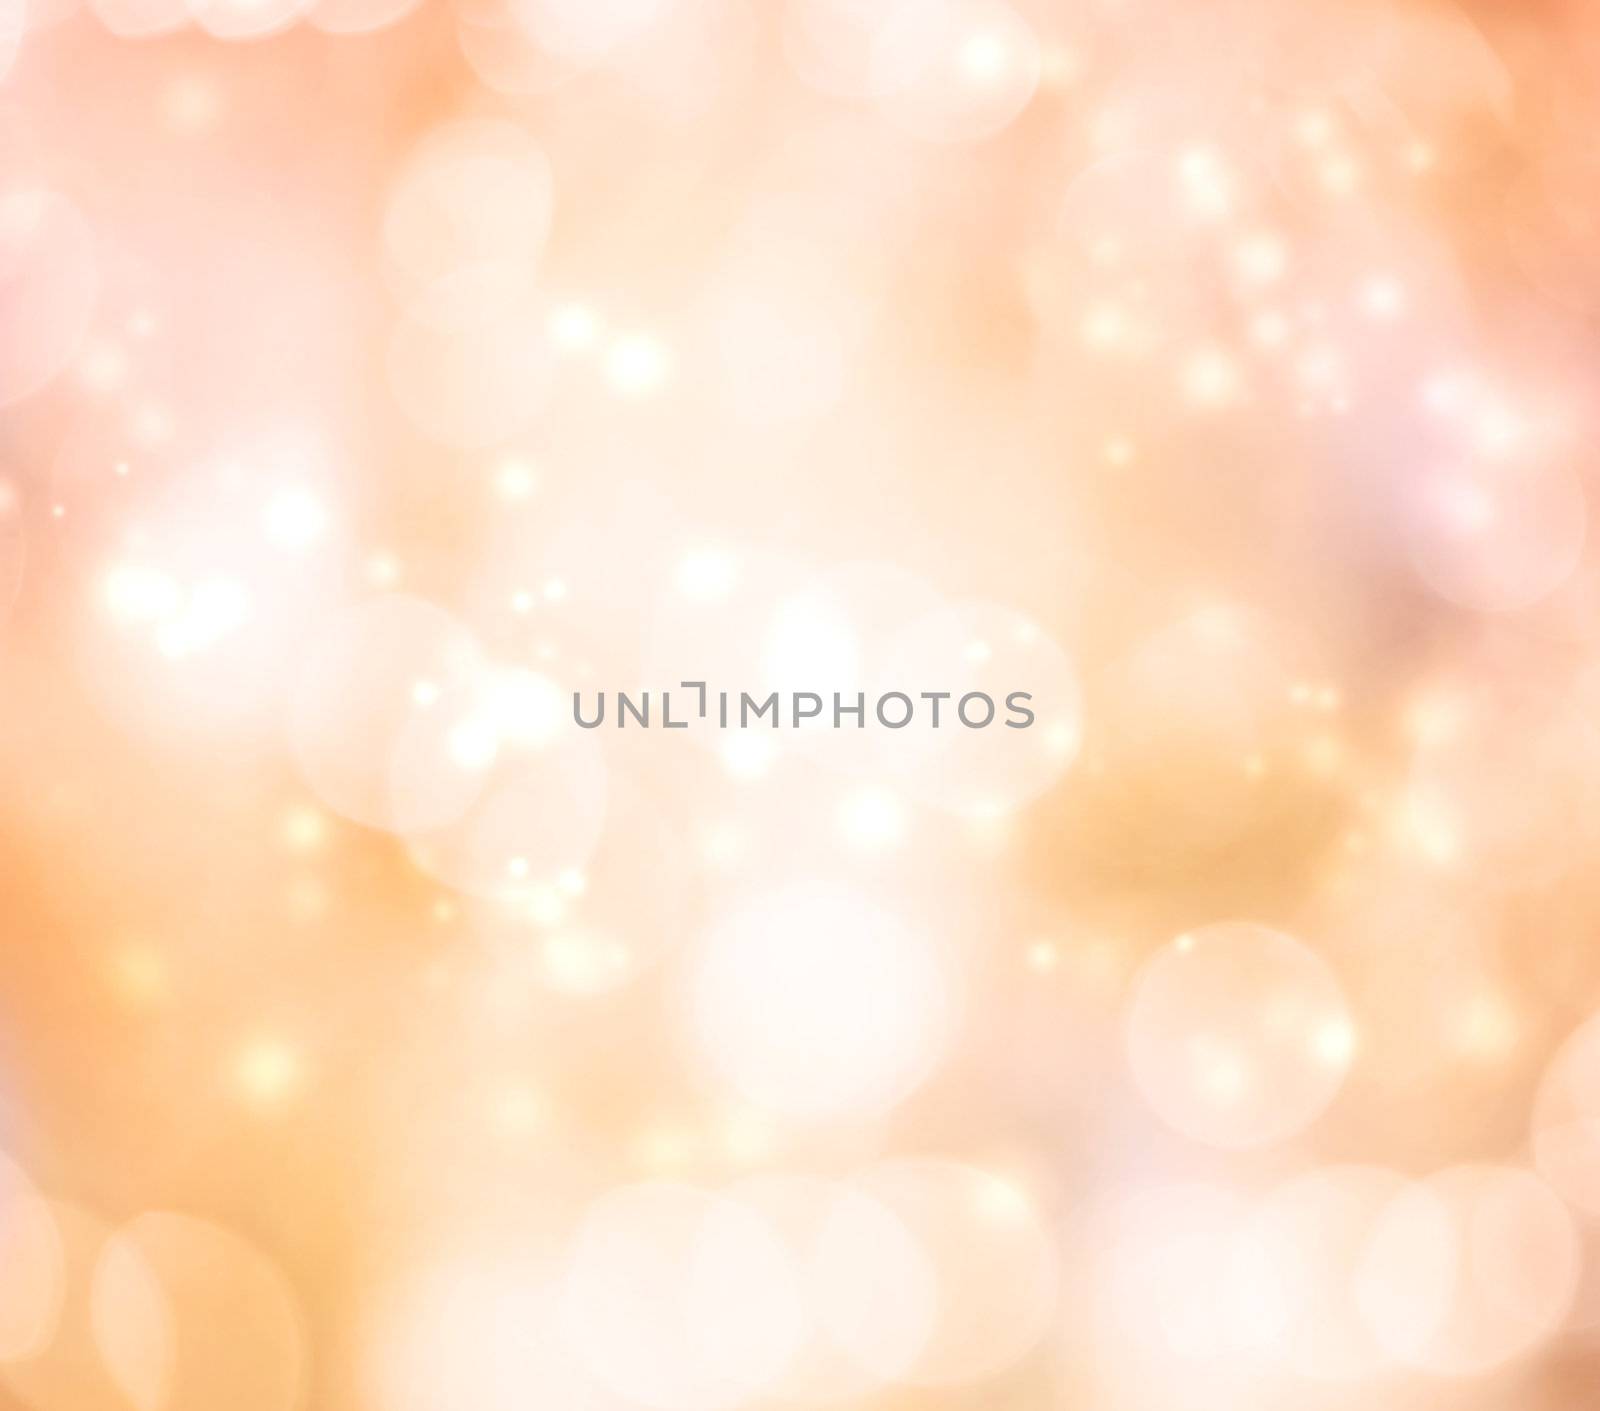 Abstract Lights Background (Glowing Pale Orange) by melpomene